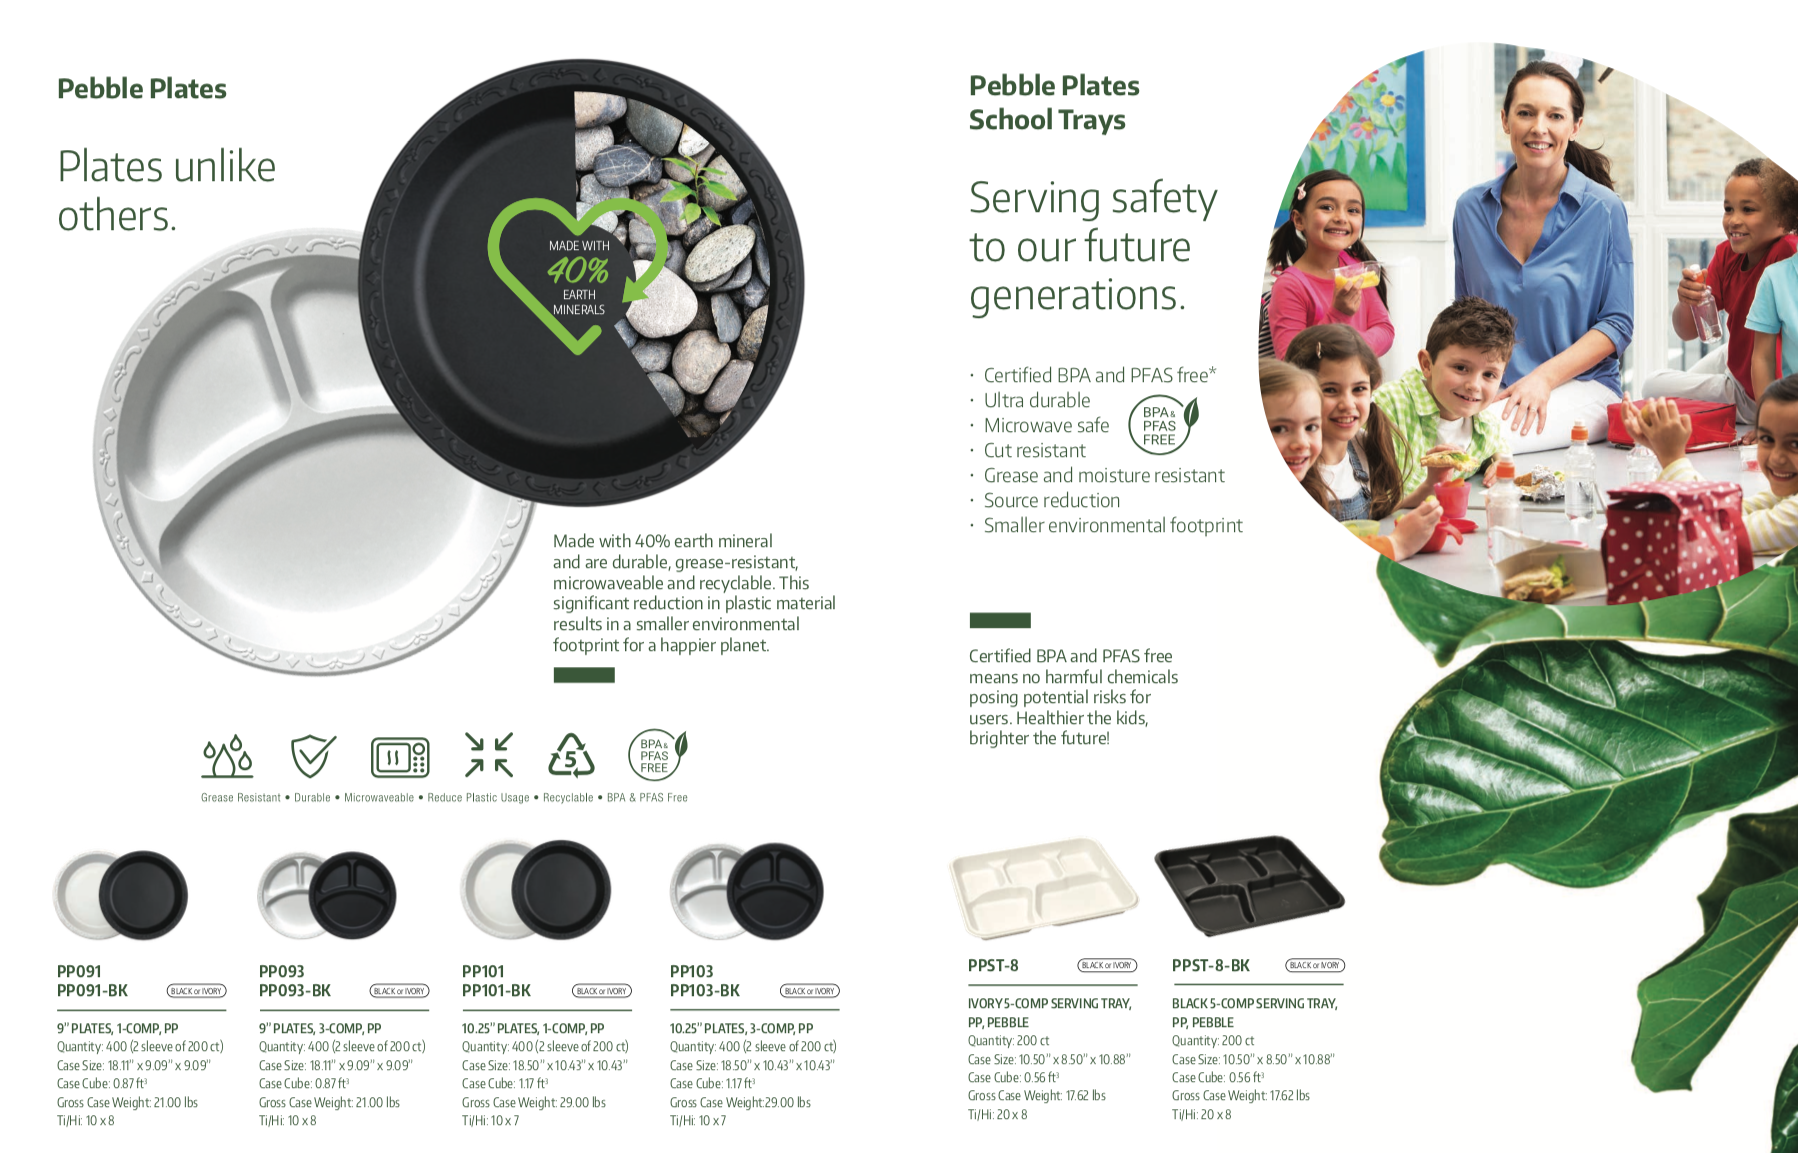 Ecopax product catalogue spread graphic by Kai Design featuring Pebble Plates and Trays